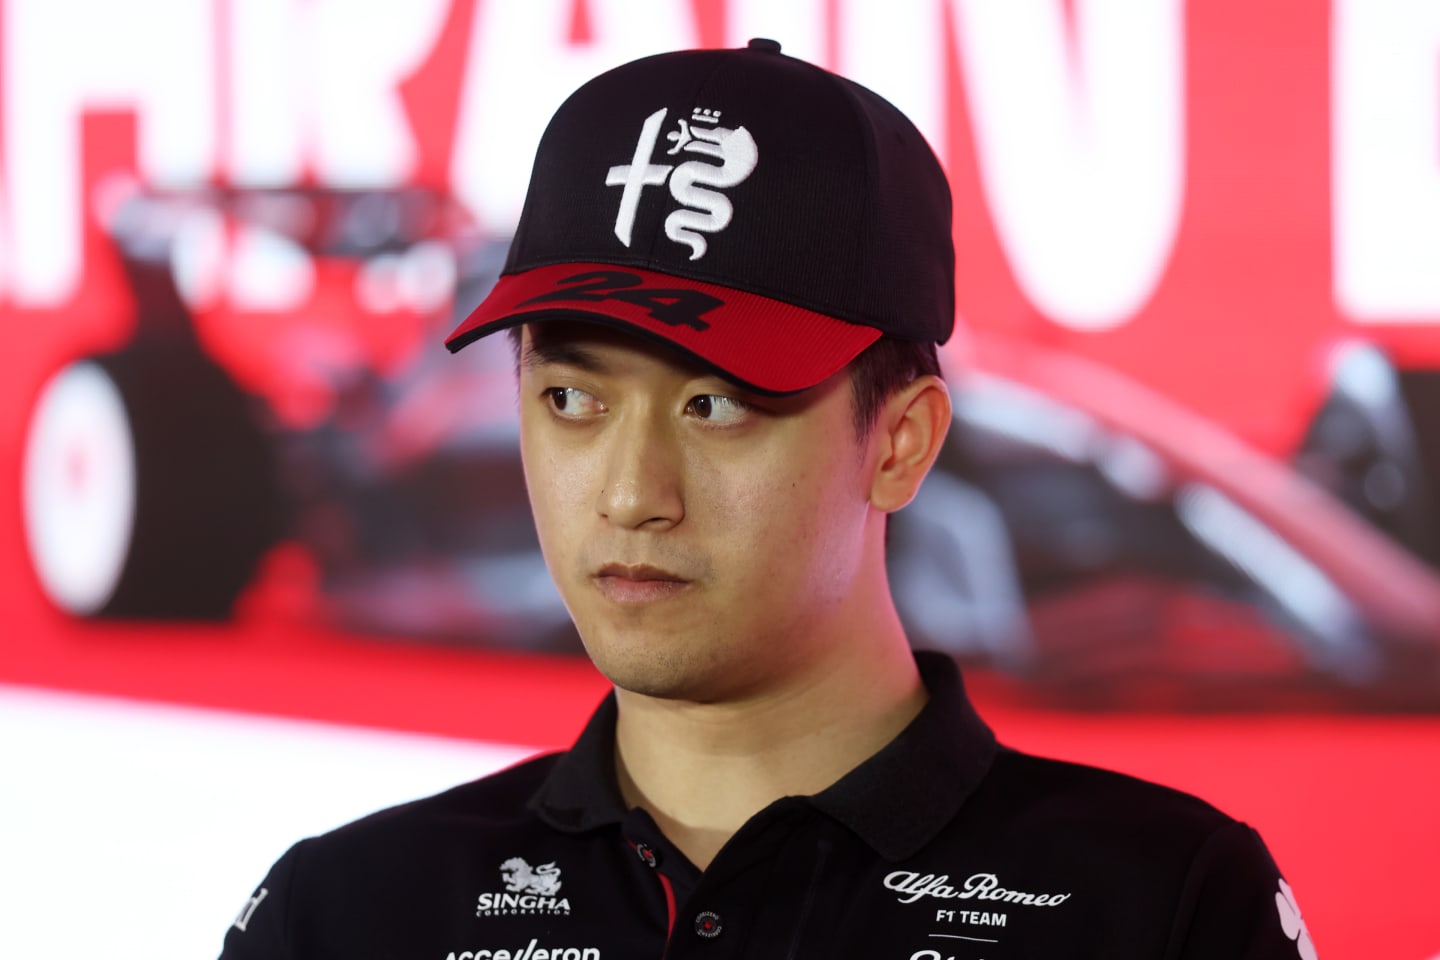 BAHRAIN, BAHRAIN - MARCH 02: Zhou Guanyu of China and Alfa Romeo F1 attends the Drivers Press Conference during previews ahead of the F1 Grand Prix of Bahrain at Bahrain International Circuit on March 02, 2023 in Bahrain, Bahrain. (Photo by Lars Baron/Getty Images)